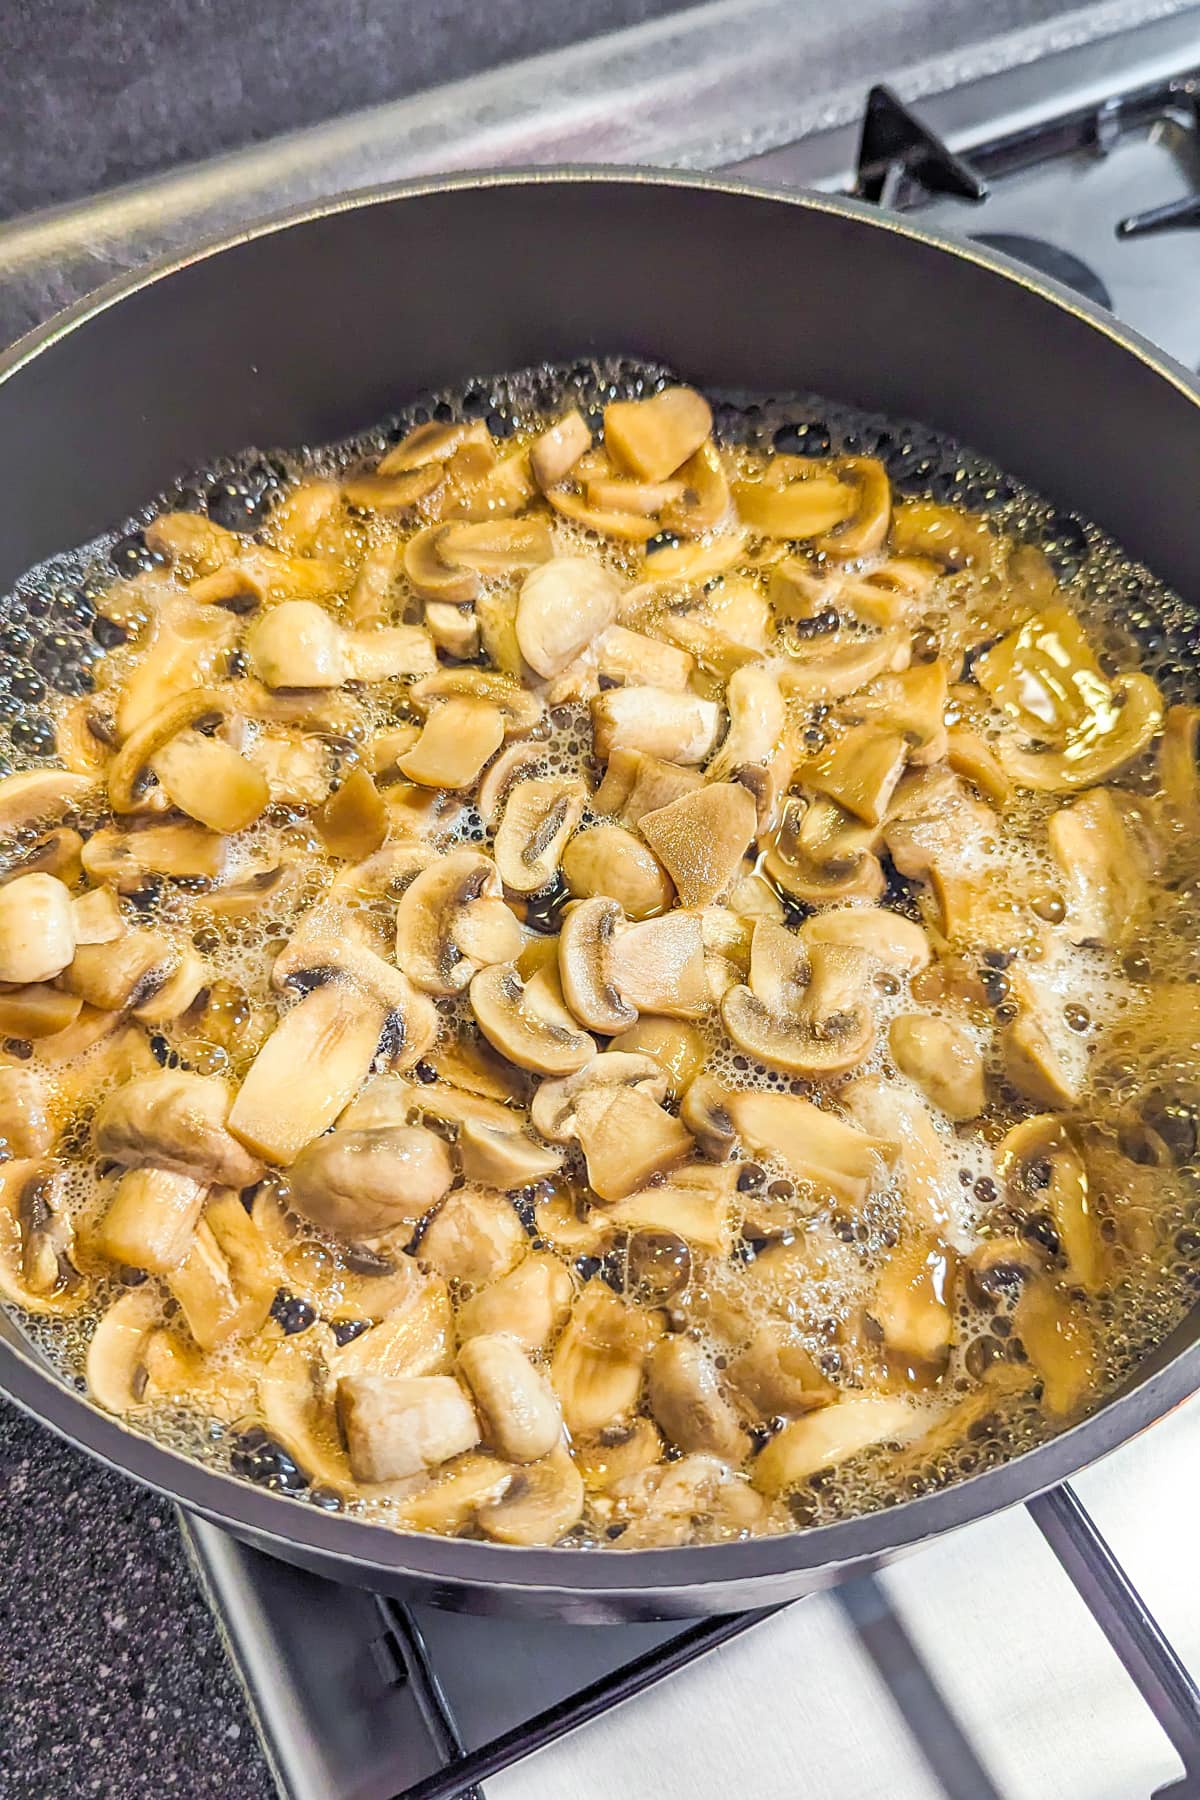 Frying pan with fried mushrooms, garlic and melted butter on the stove.